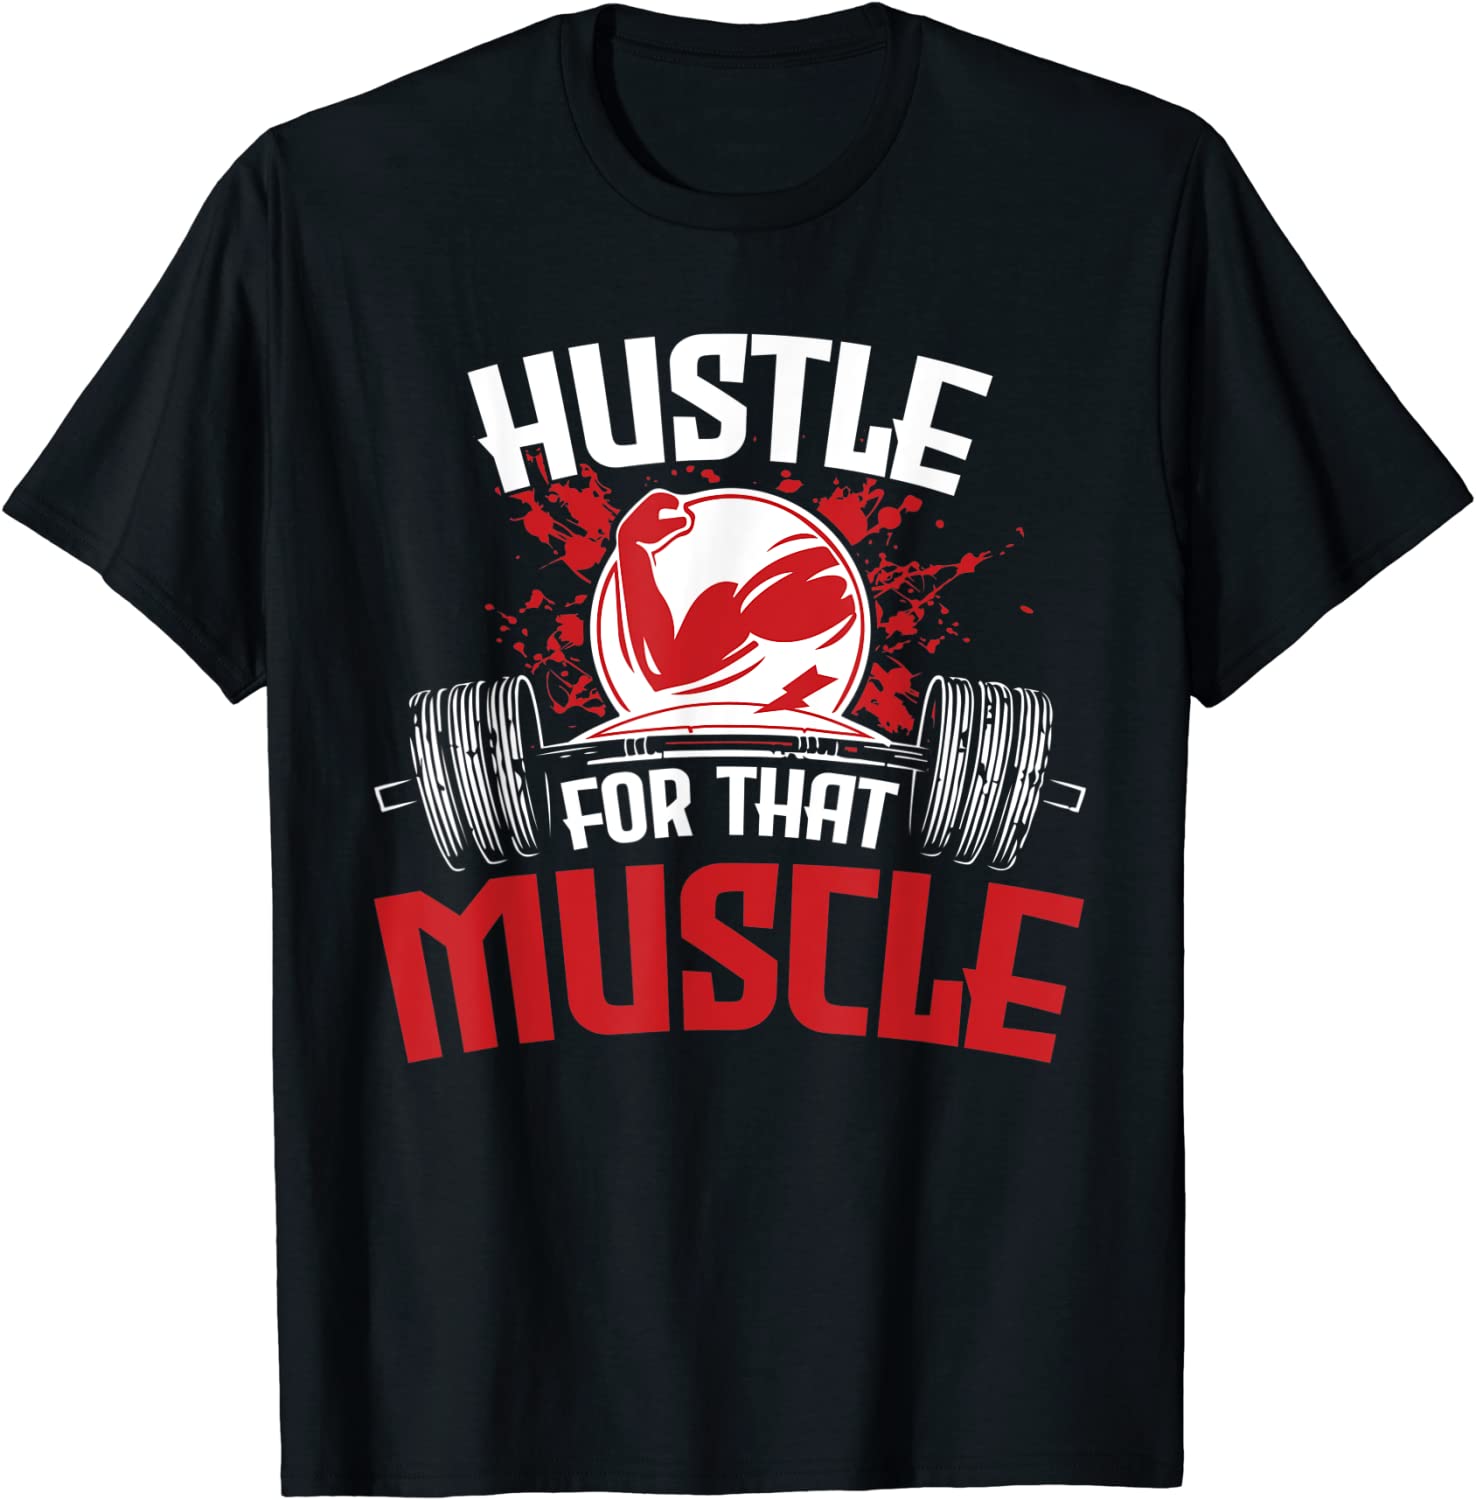 Hustle For That Muscle Fitness Motivation T-Shirt Best Price